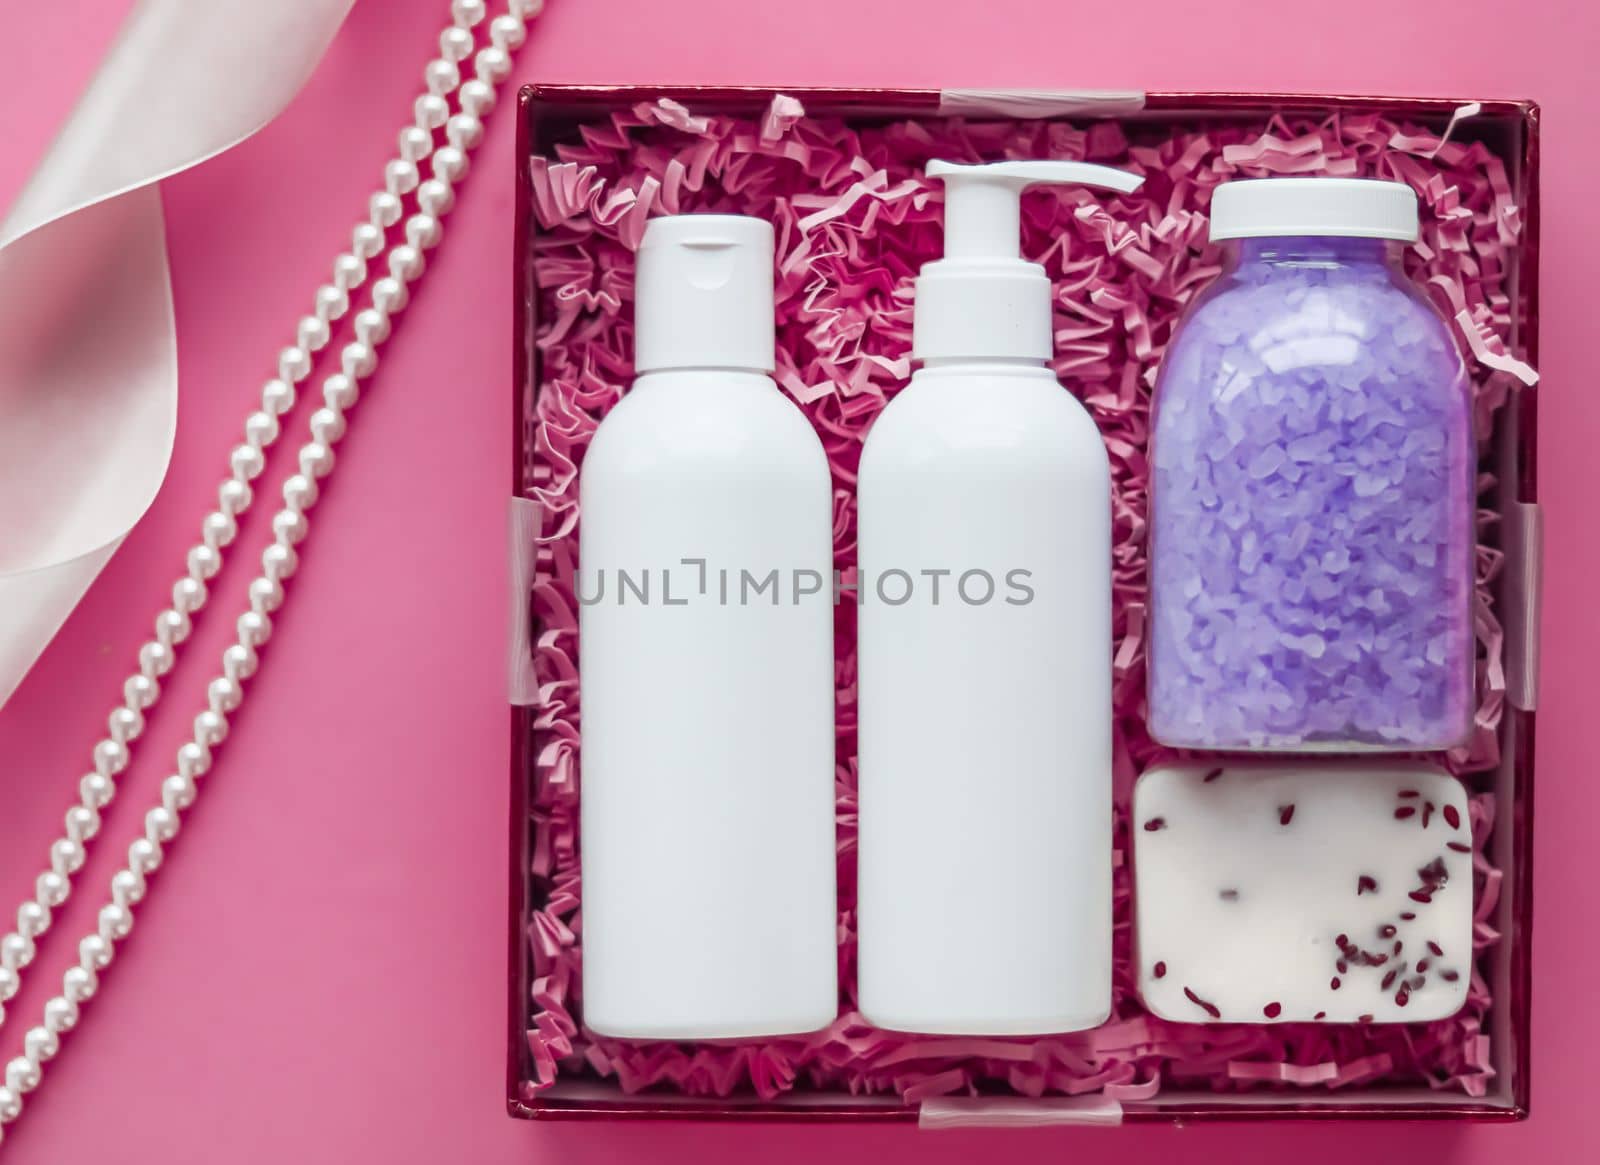 Beauty box subscription package, luxury skincare and body care products, milk lotion, bath salt, soap, shower gel as flat lay on pink background, spa cosmetics as holiday gift, online shopping delivery, flatlay.